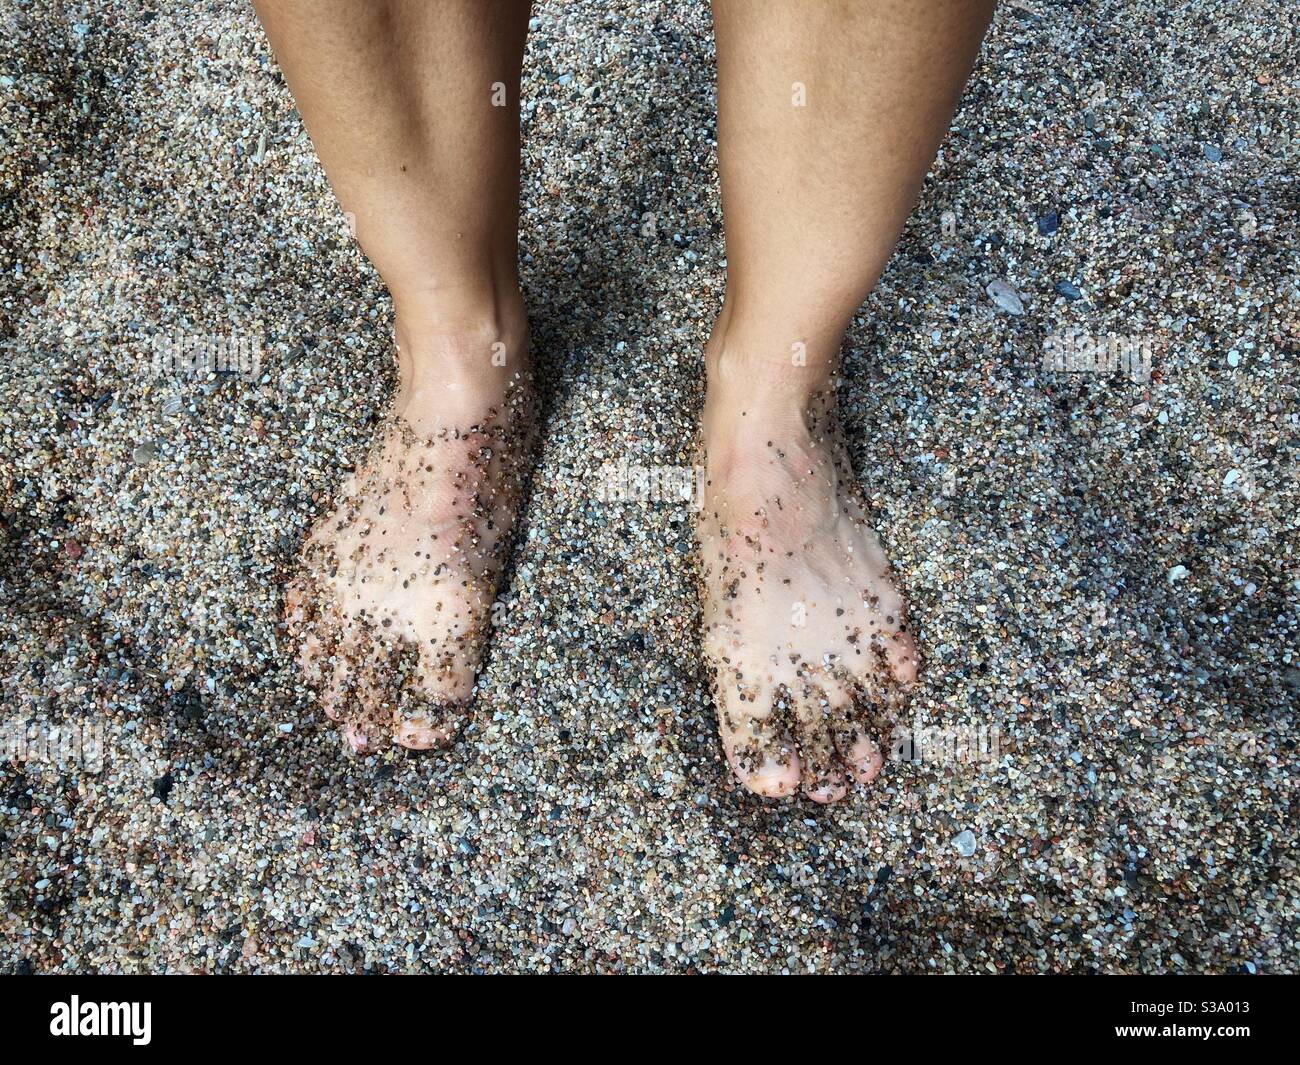 Feet on sand, elevated view Stock Photo